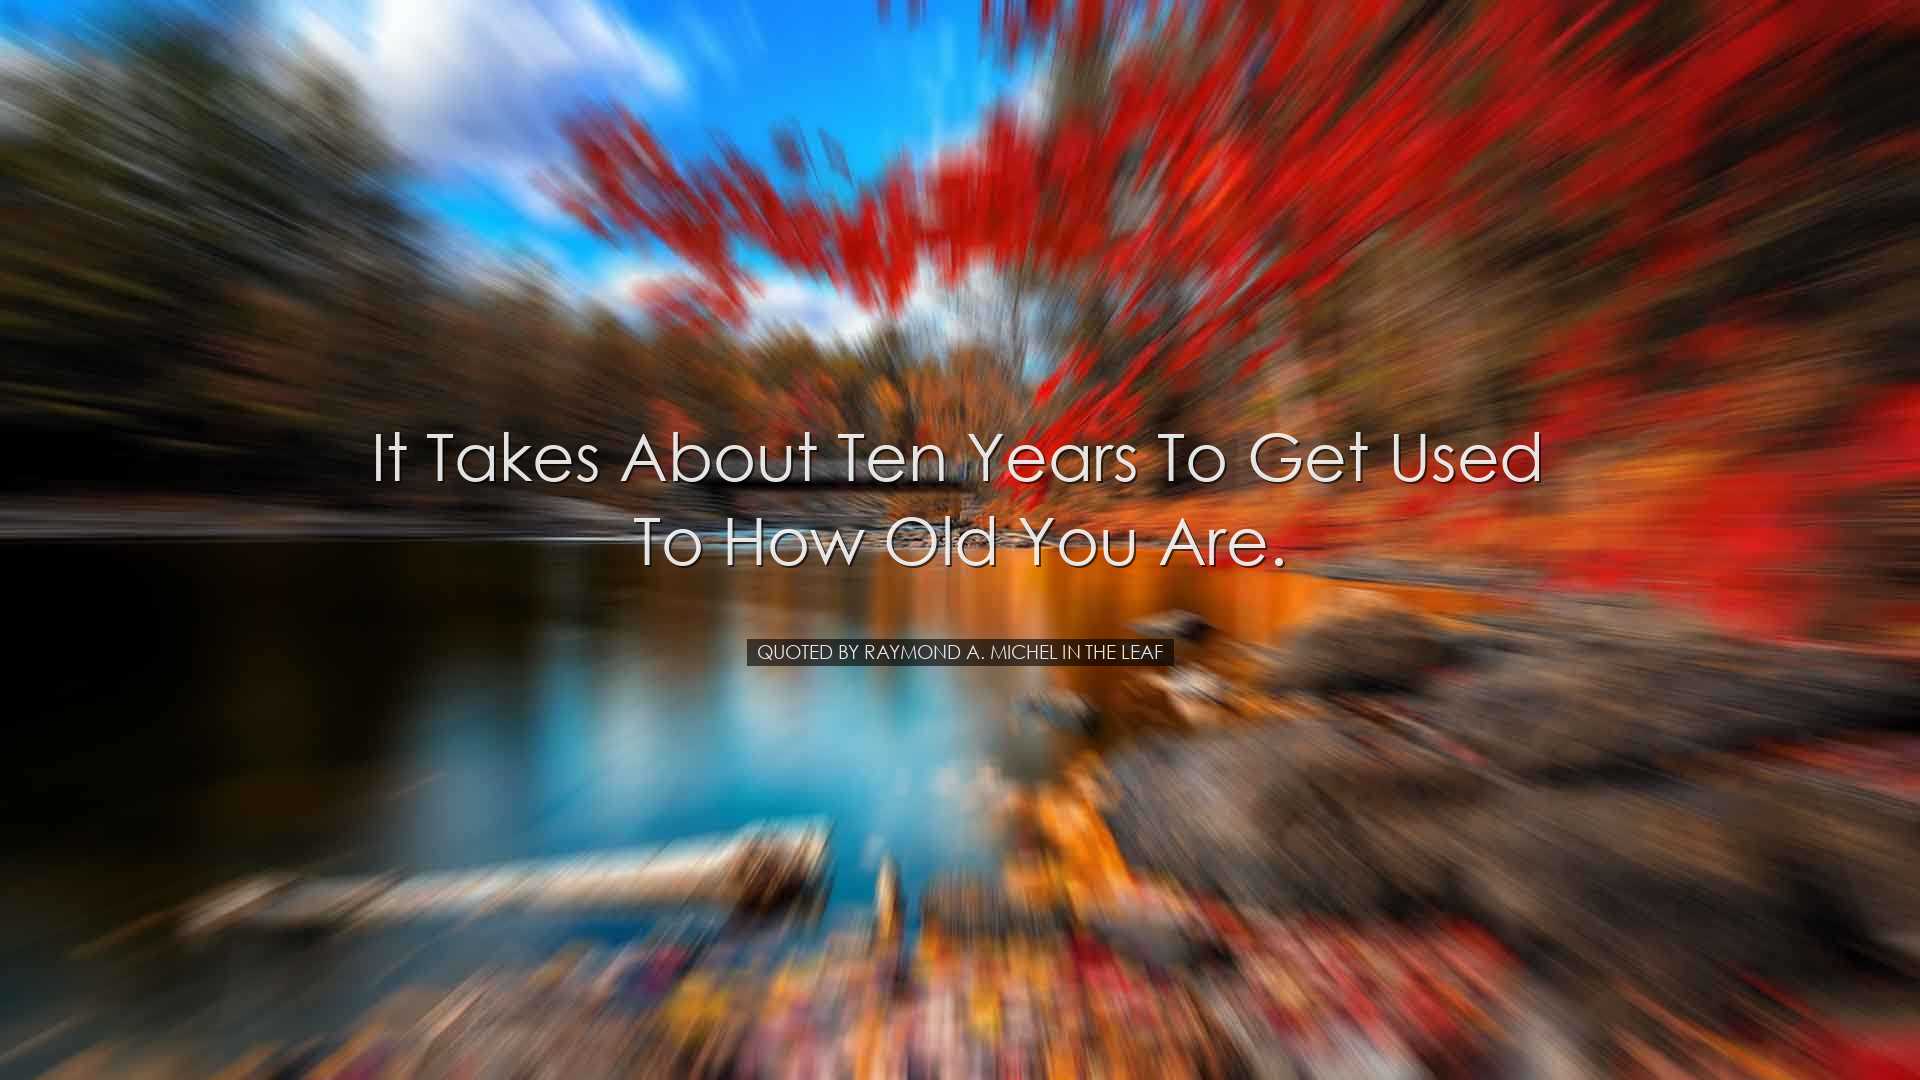 It takes about ten years to get used to how old you are. - Quoted